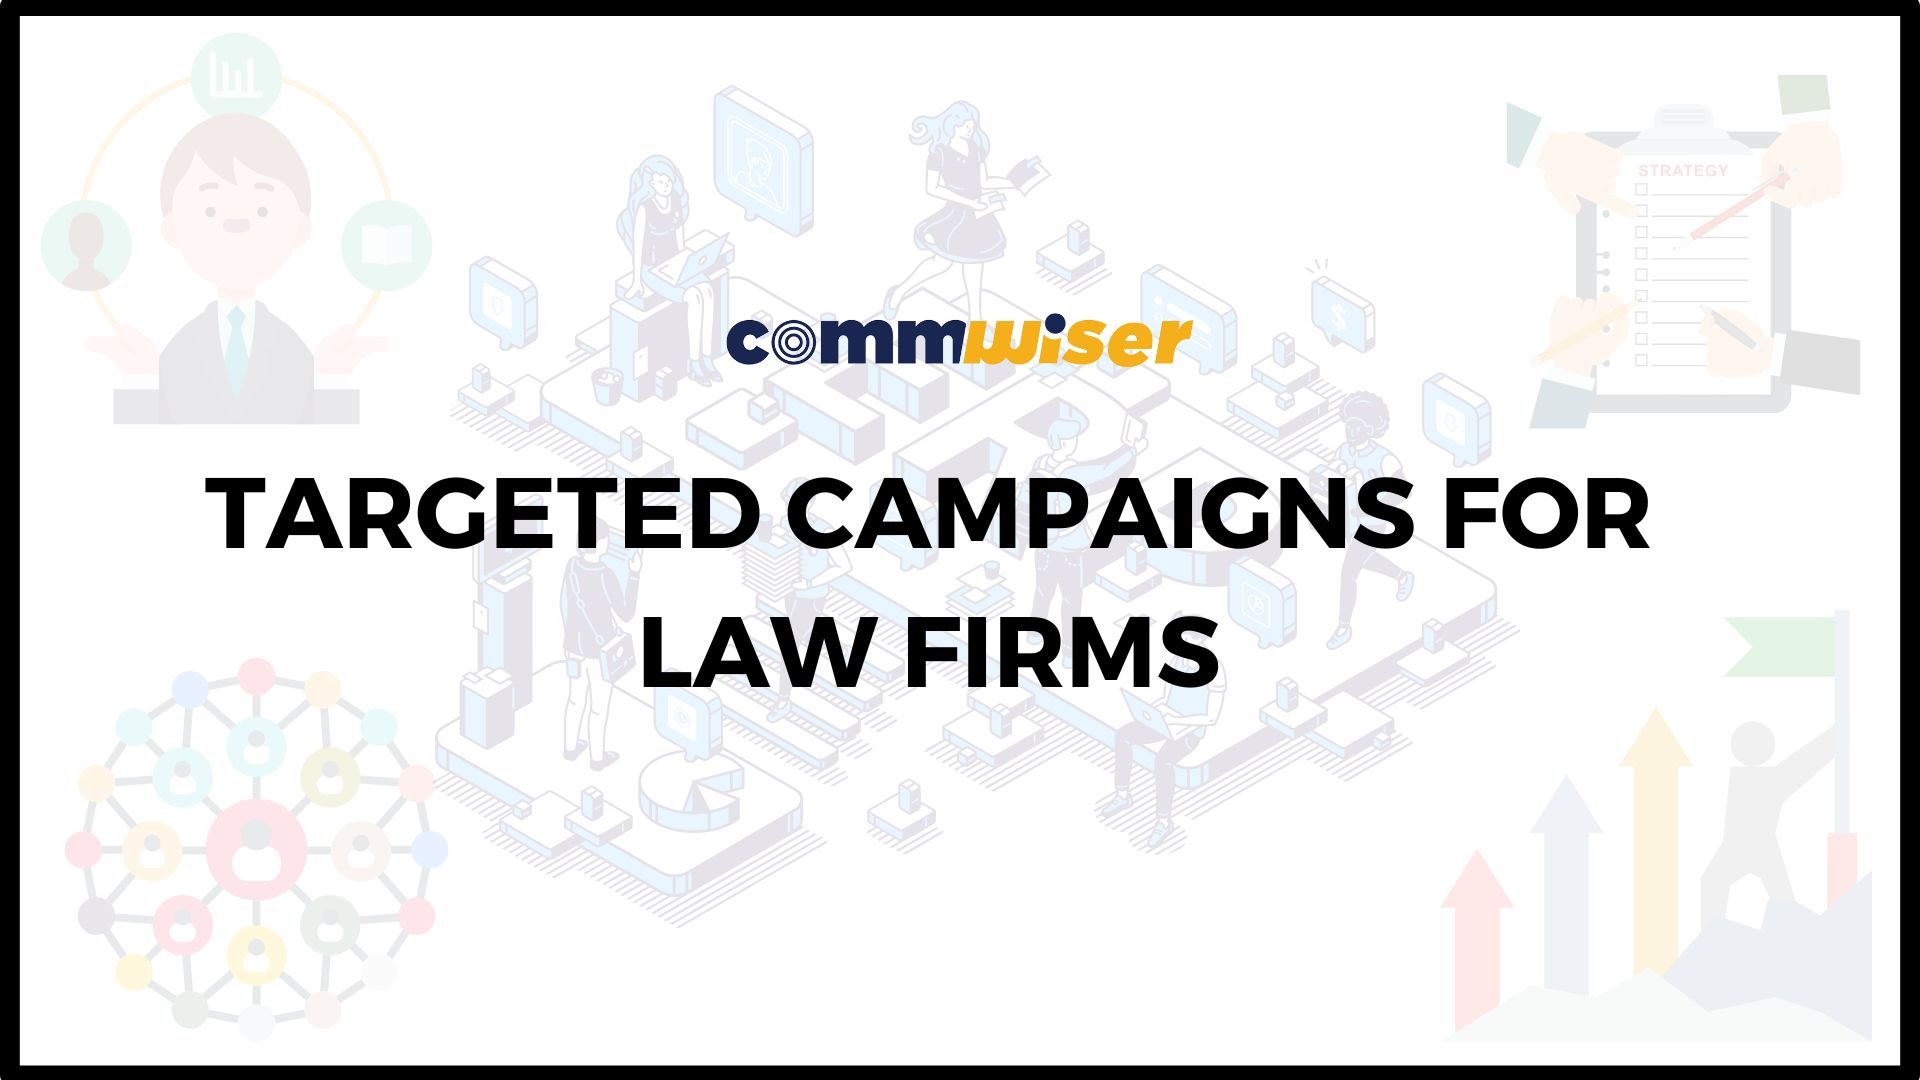 TARGETED CAMPAIGNS FOR LAW FIRMS